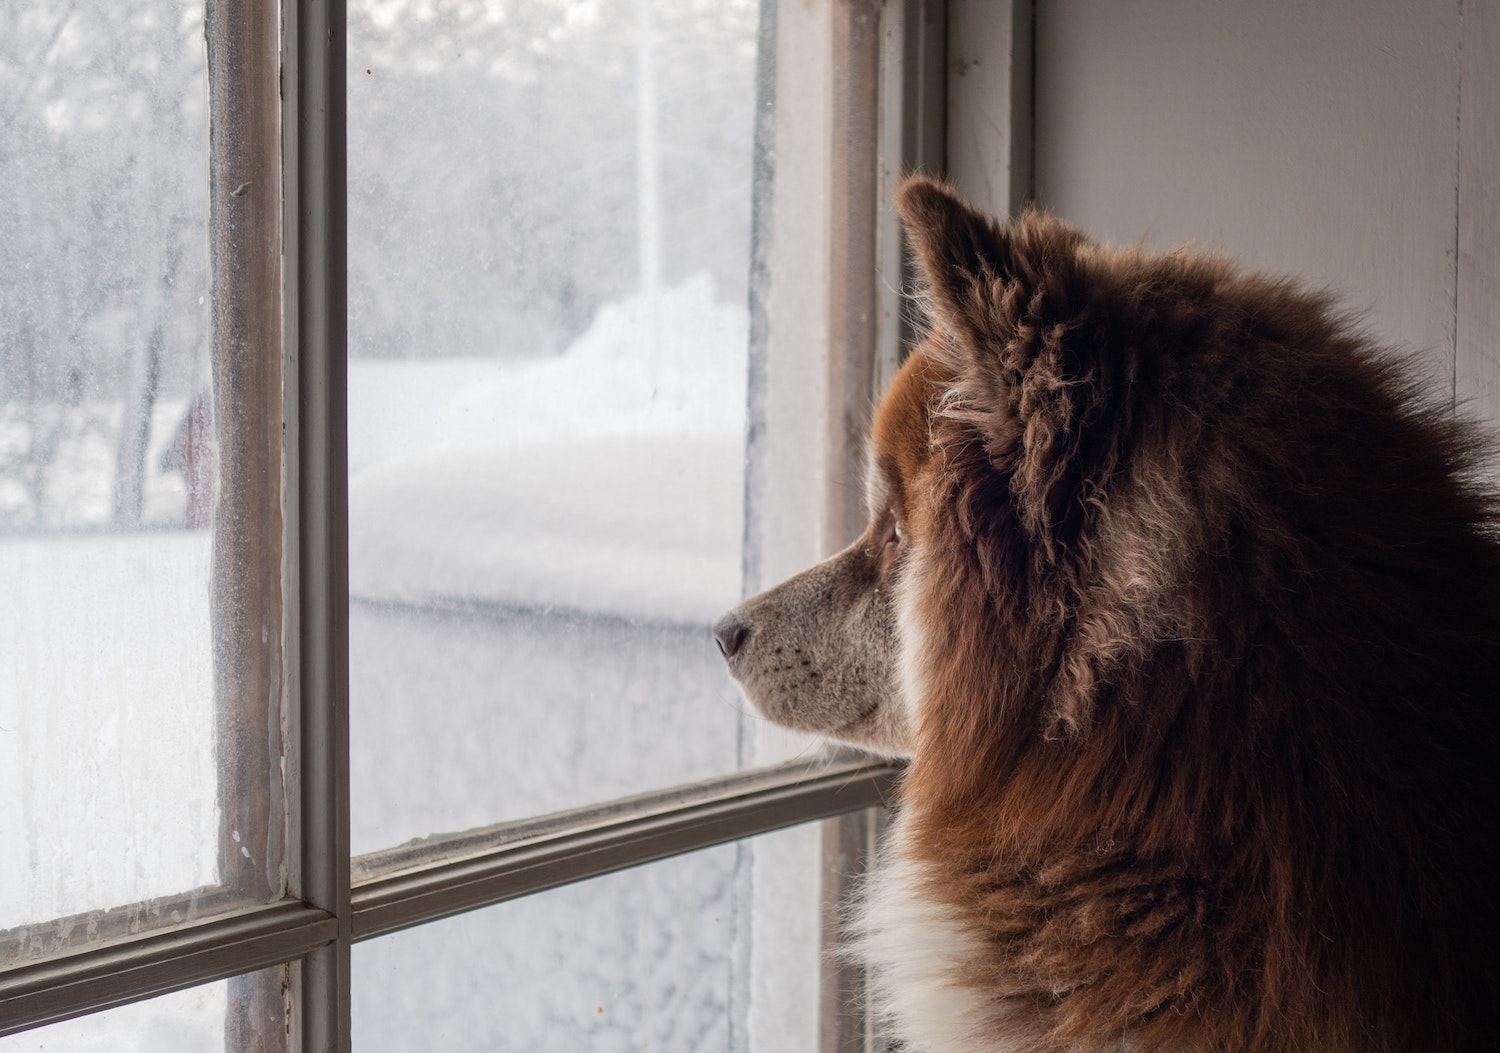 A dog looking out a window in the wintertime